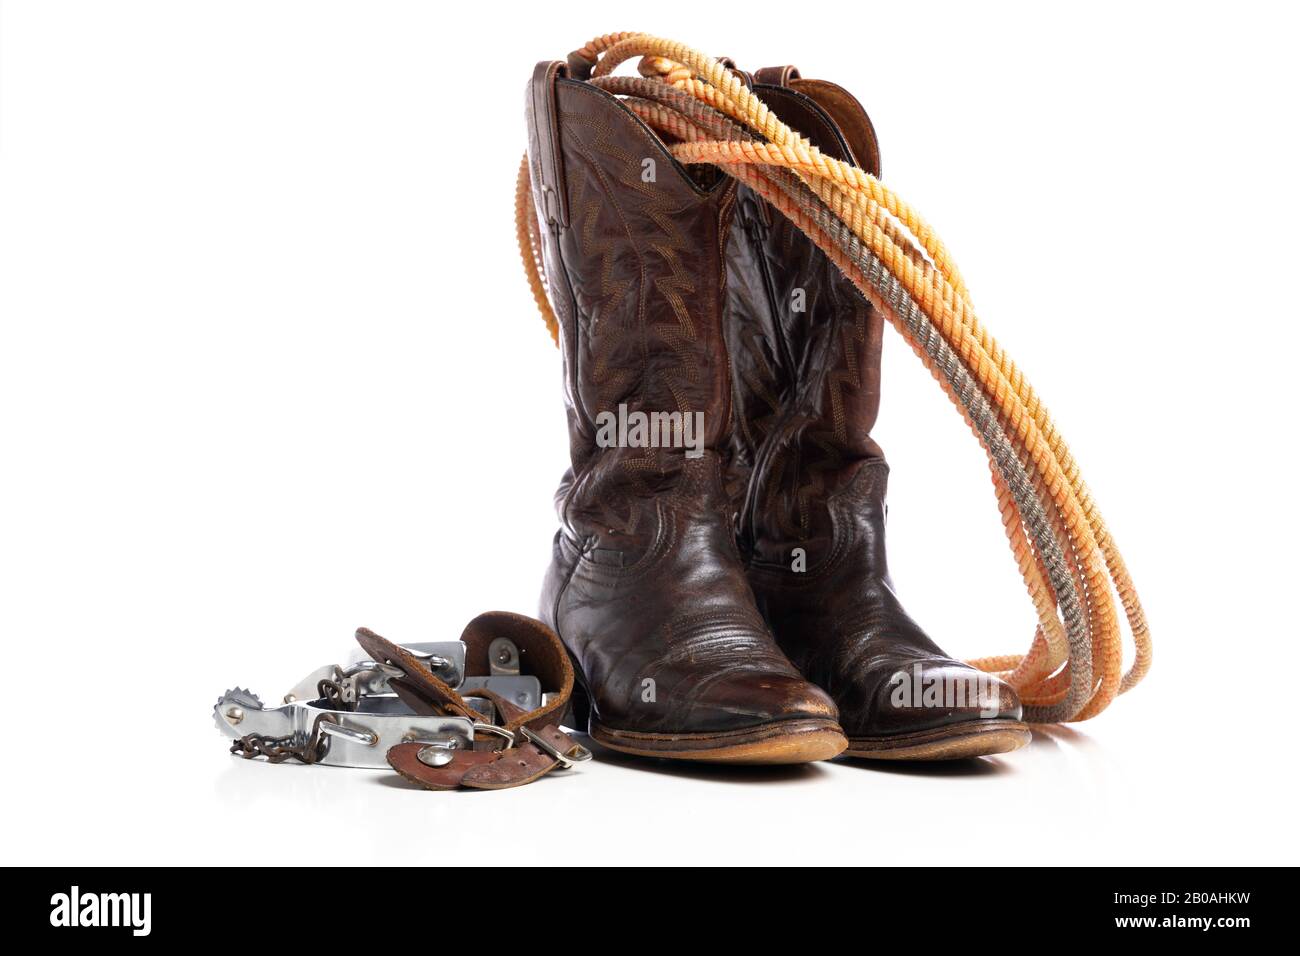 Western boots and a lap or lariat rope and spurs on a white background Stock Photo